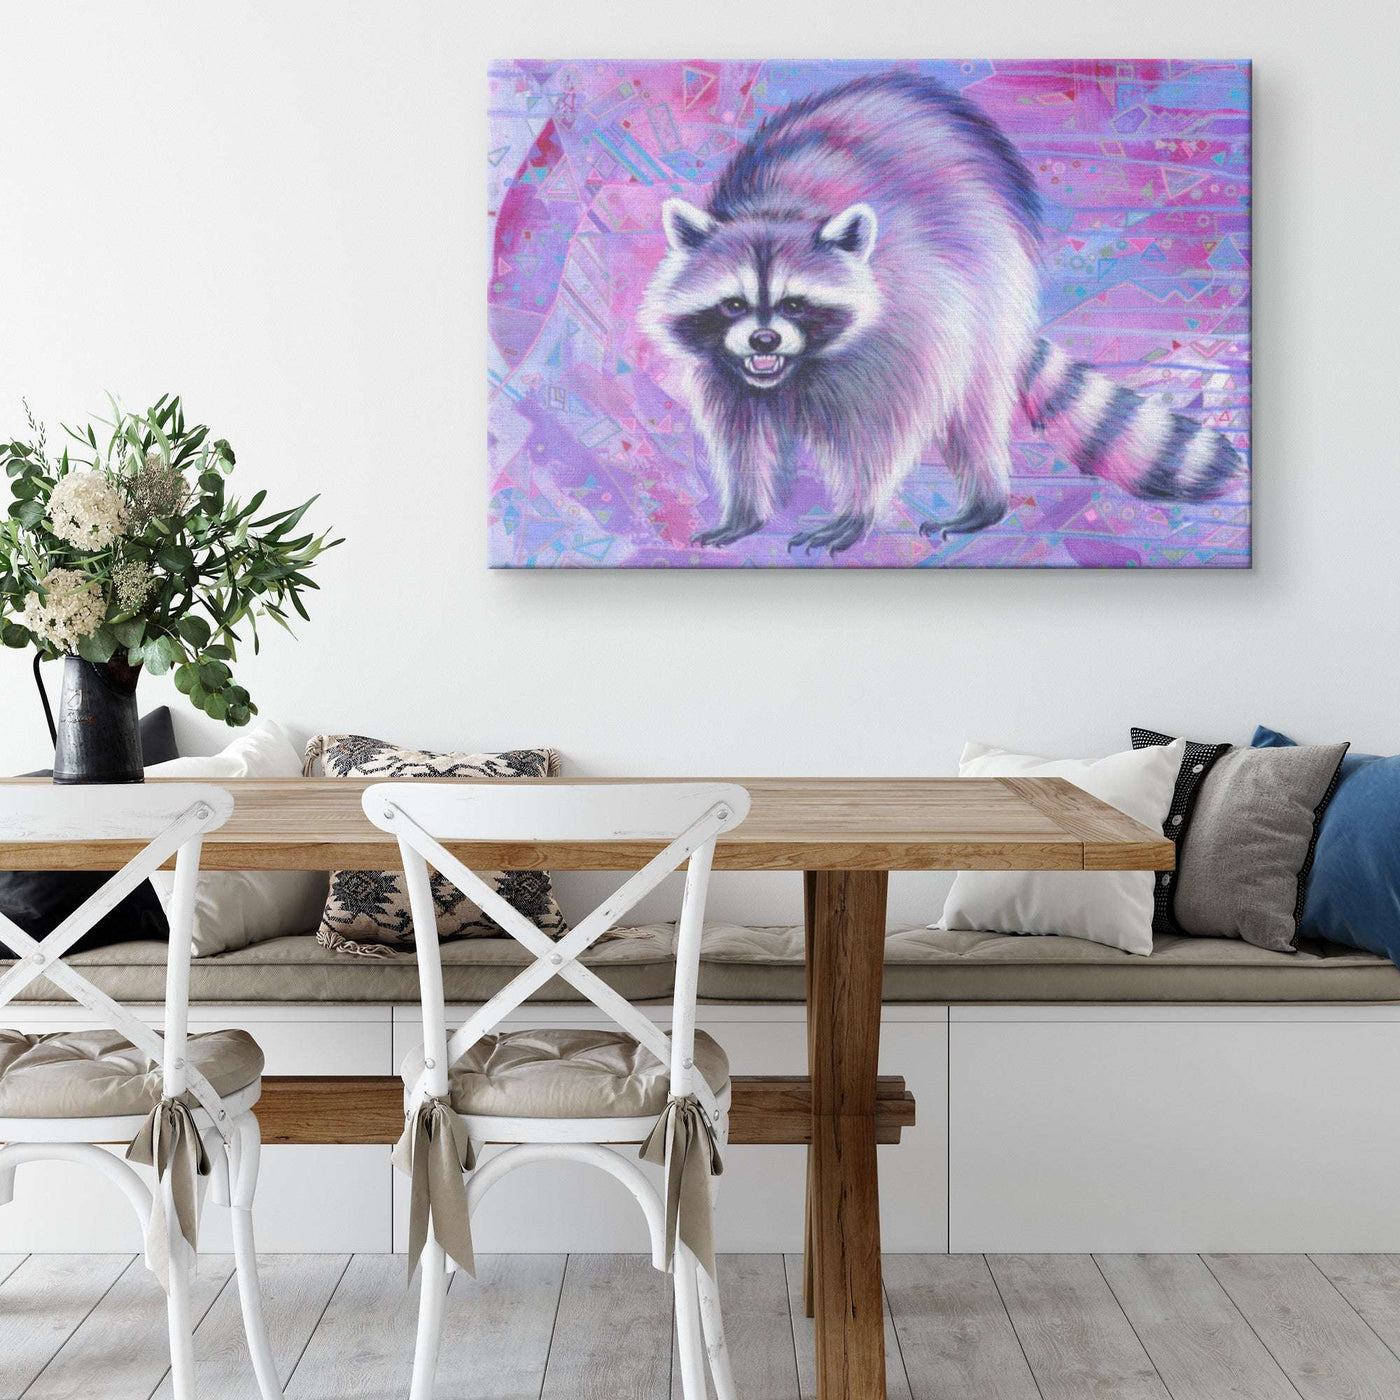 A colorful pink and purple Canvas Raccoon Art Print hanging above a wooden table.